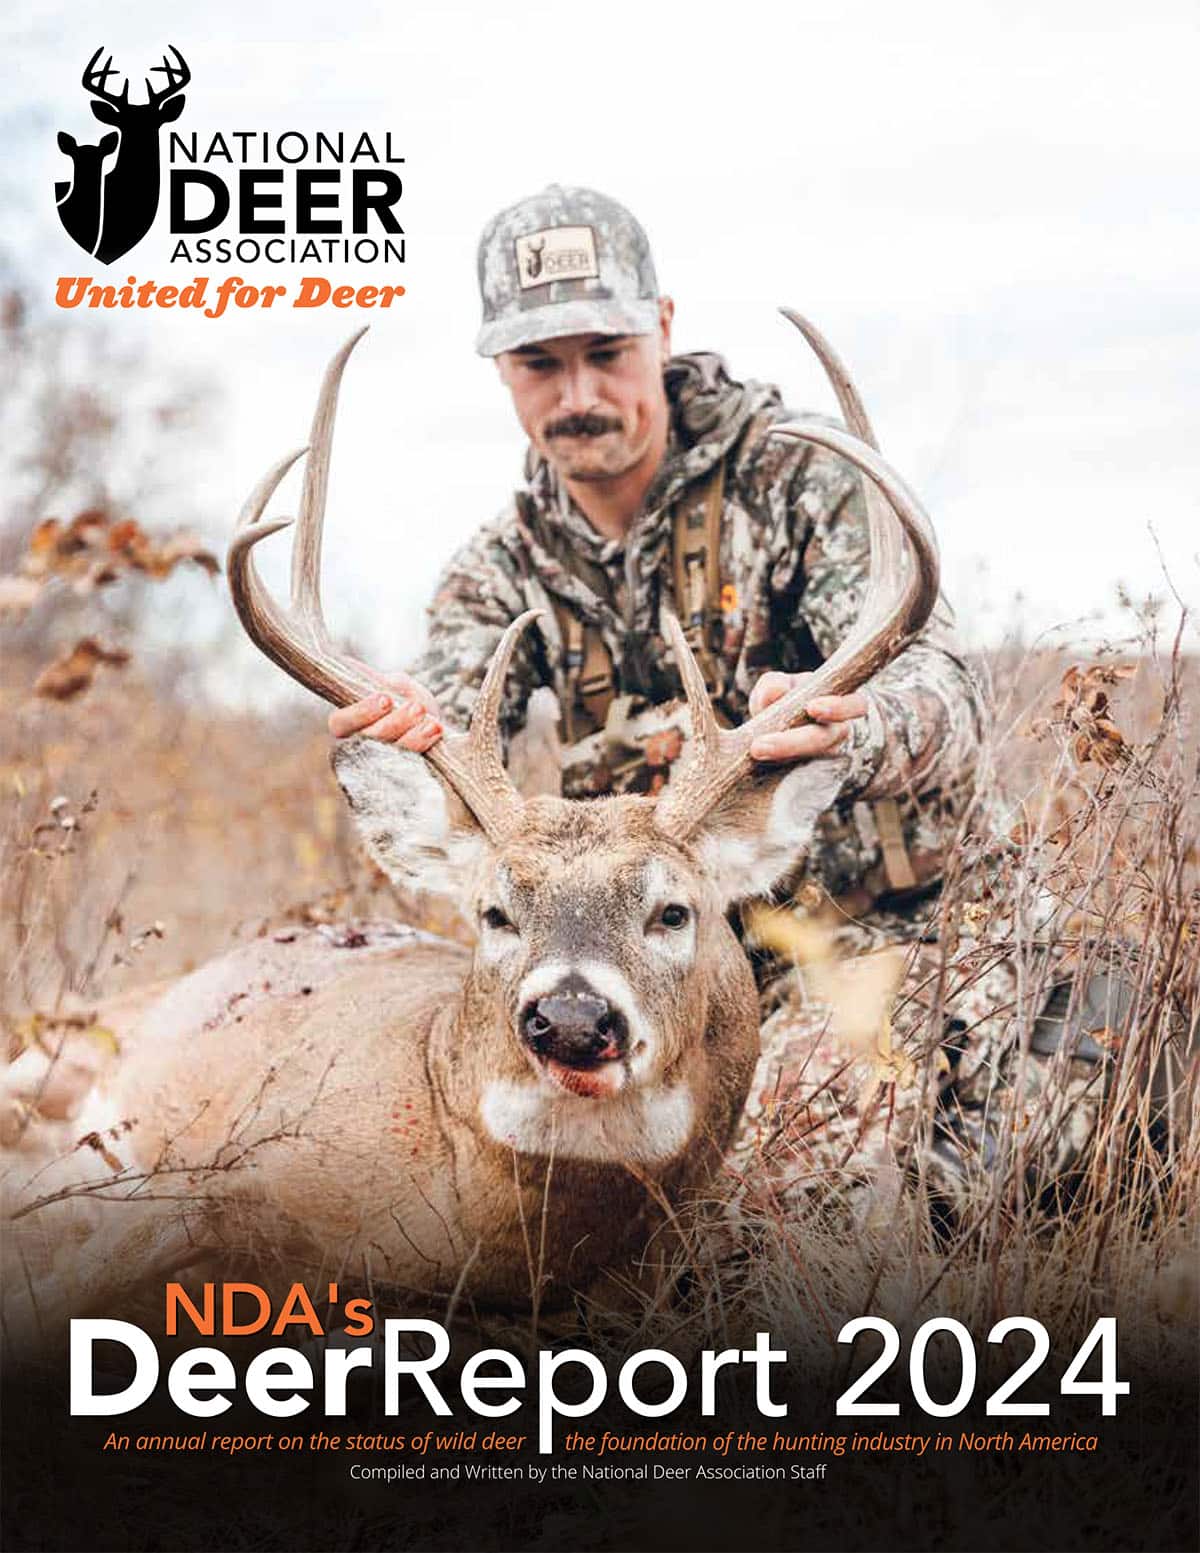 The cover of the 2024 Deer Report with Mark Kenyon.